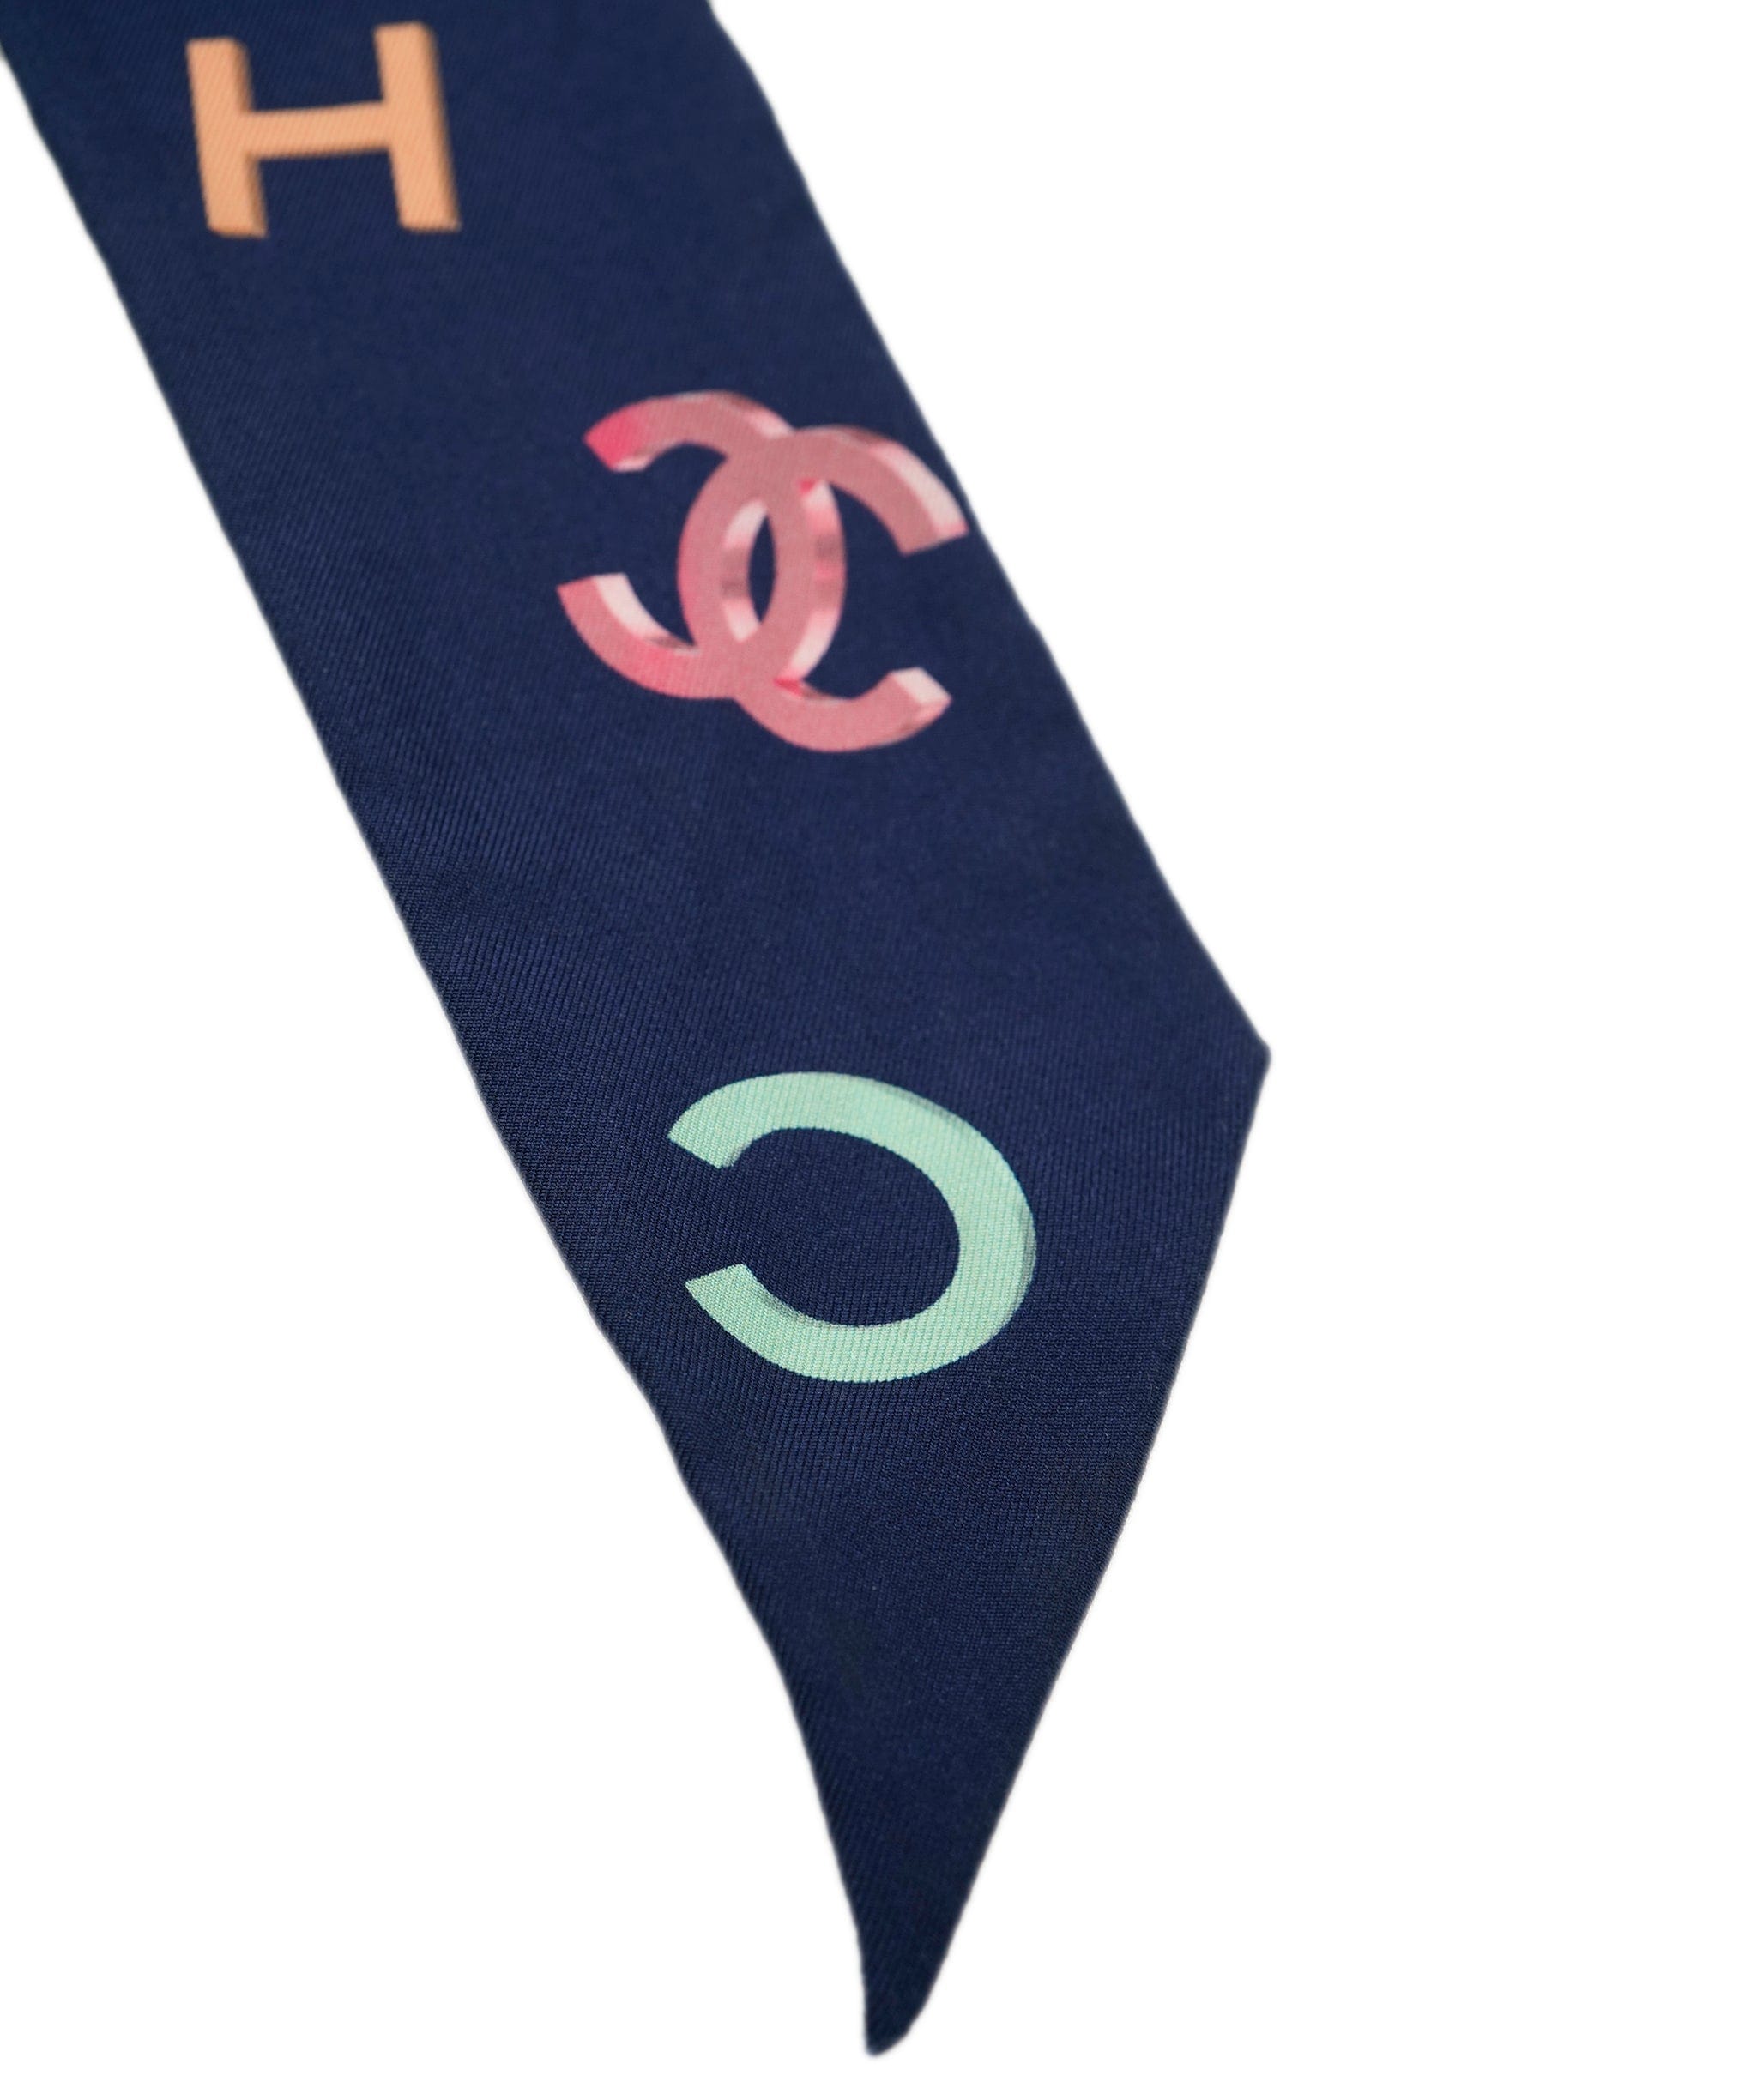 Chanel Chanel navy/white silk letters neck scarf 119cm - AJC0661